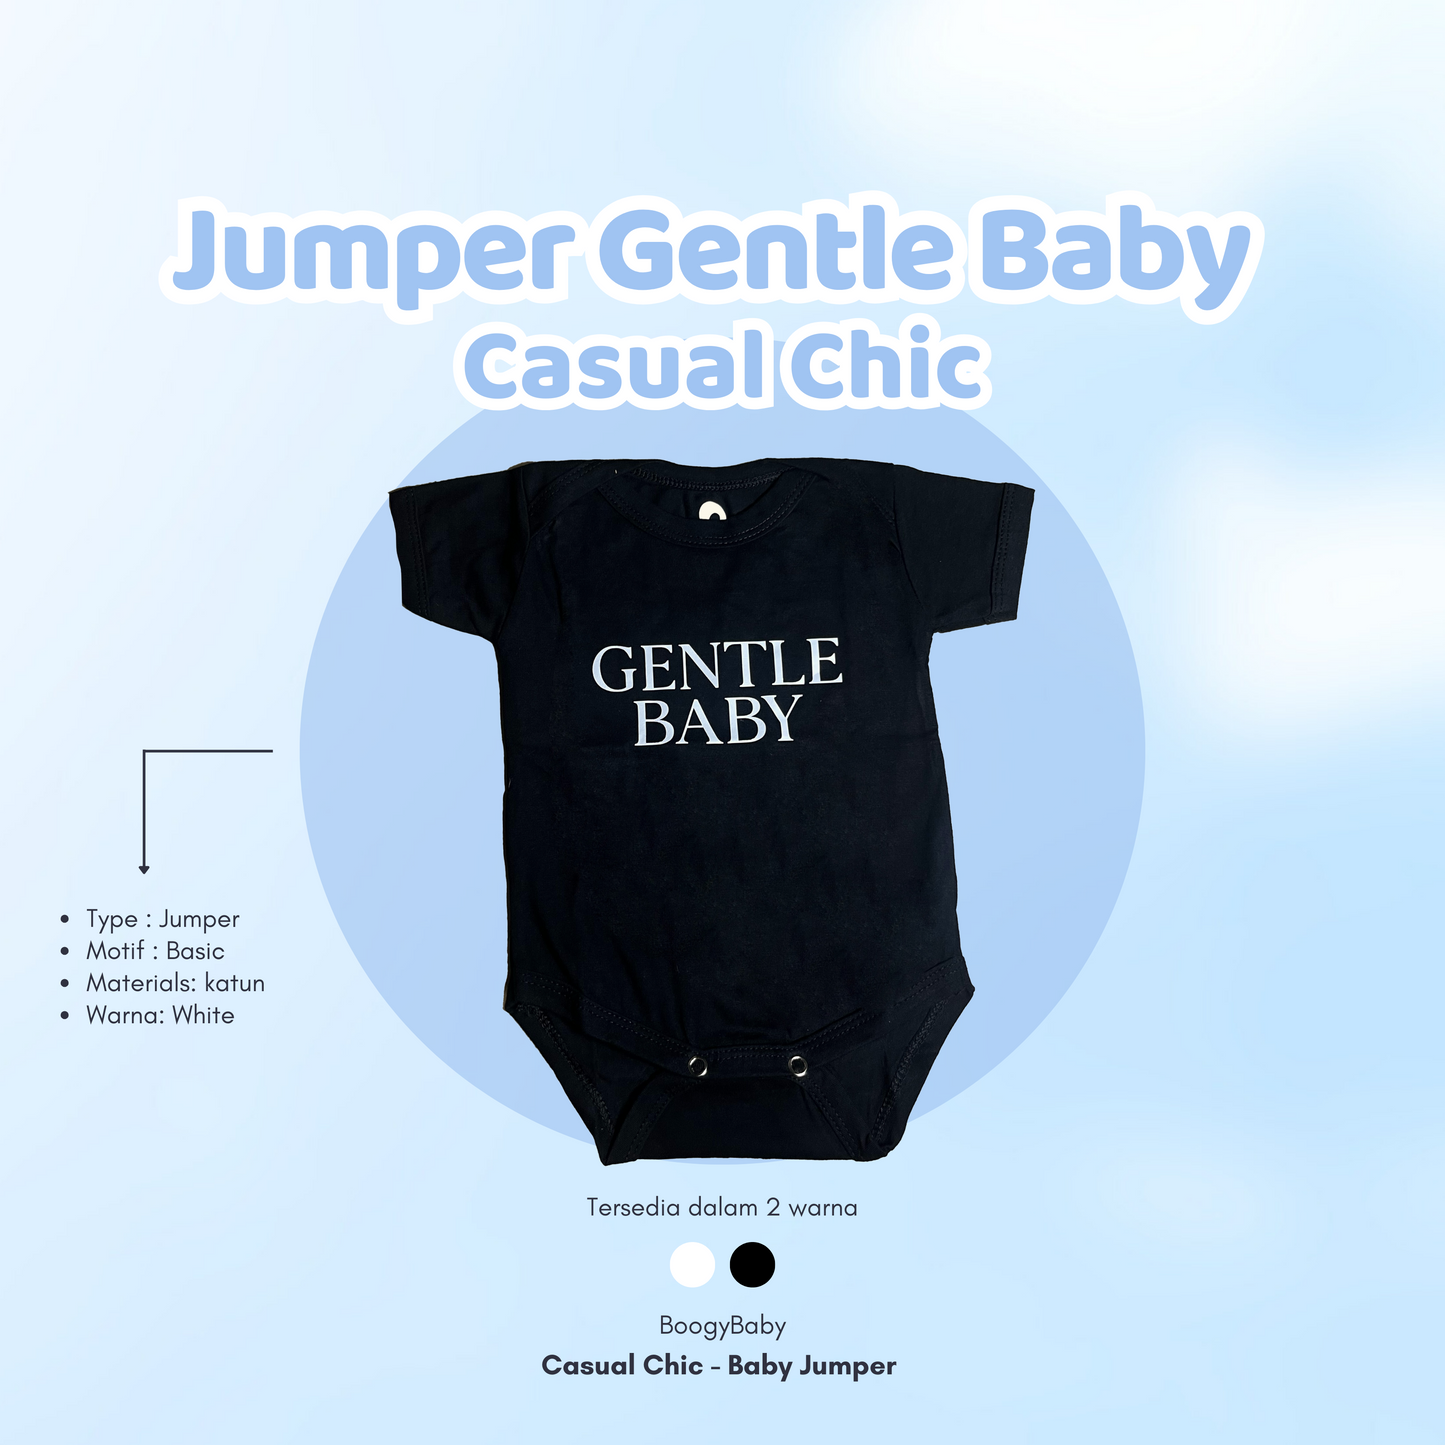 Jumper Gentle Baby (Casual Chic)